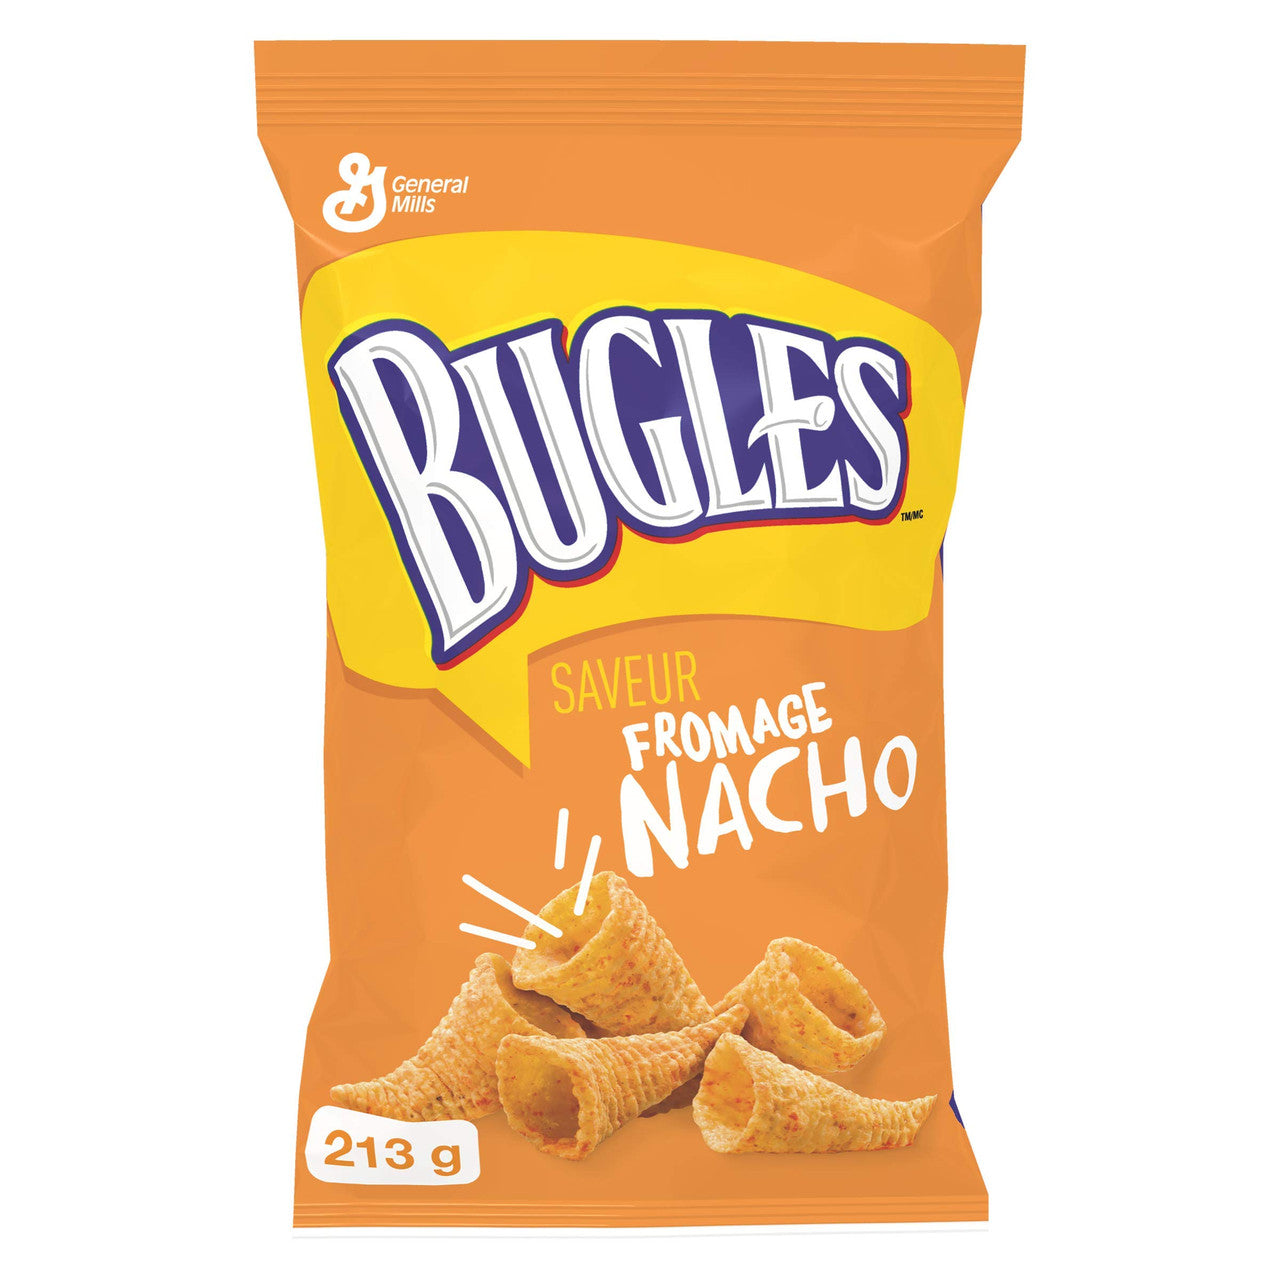 Bugles Nacho Cheese Corn Snacks 213g/7.5oz (4pk) {Imported from Canada}